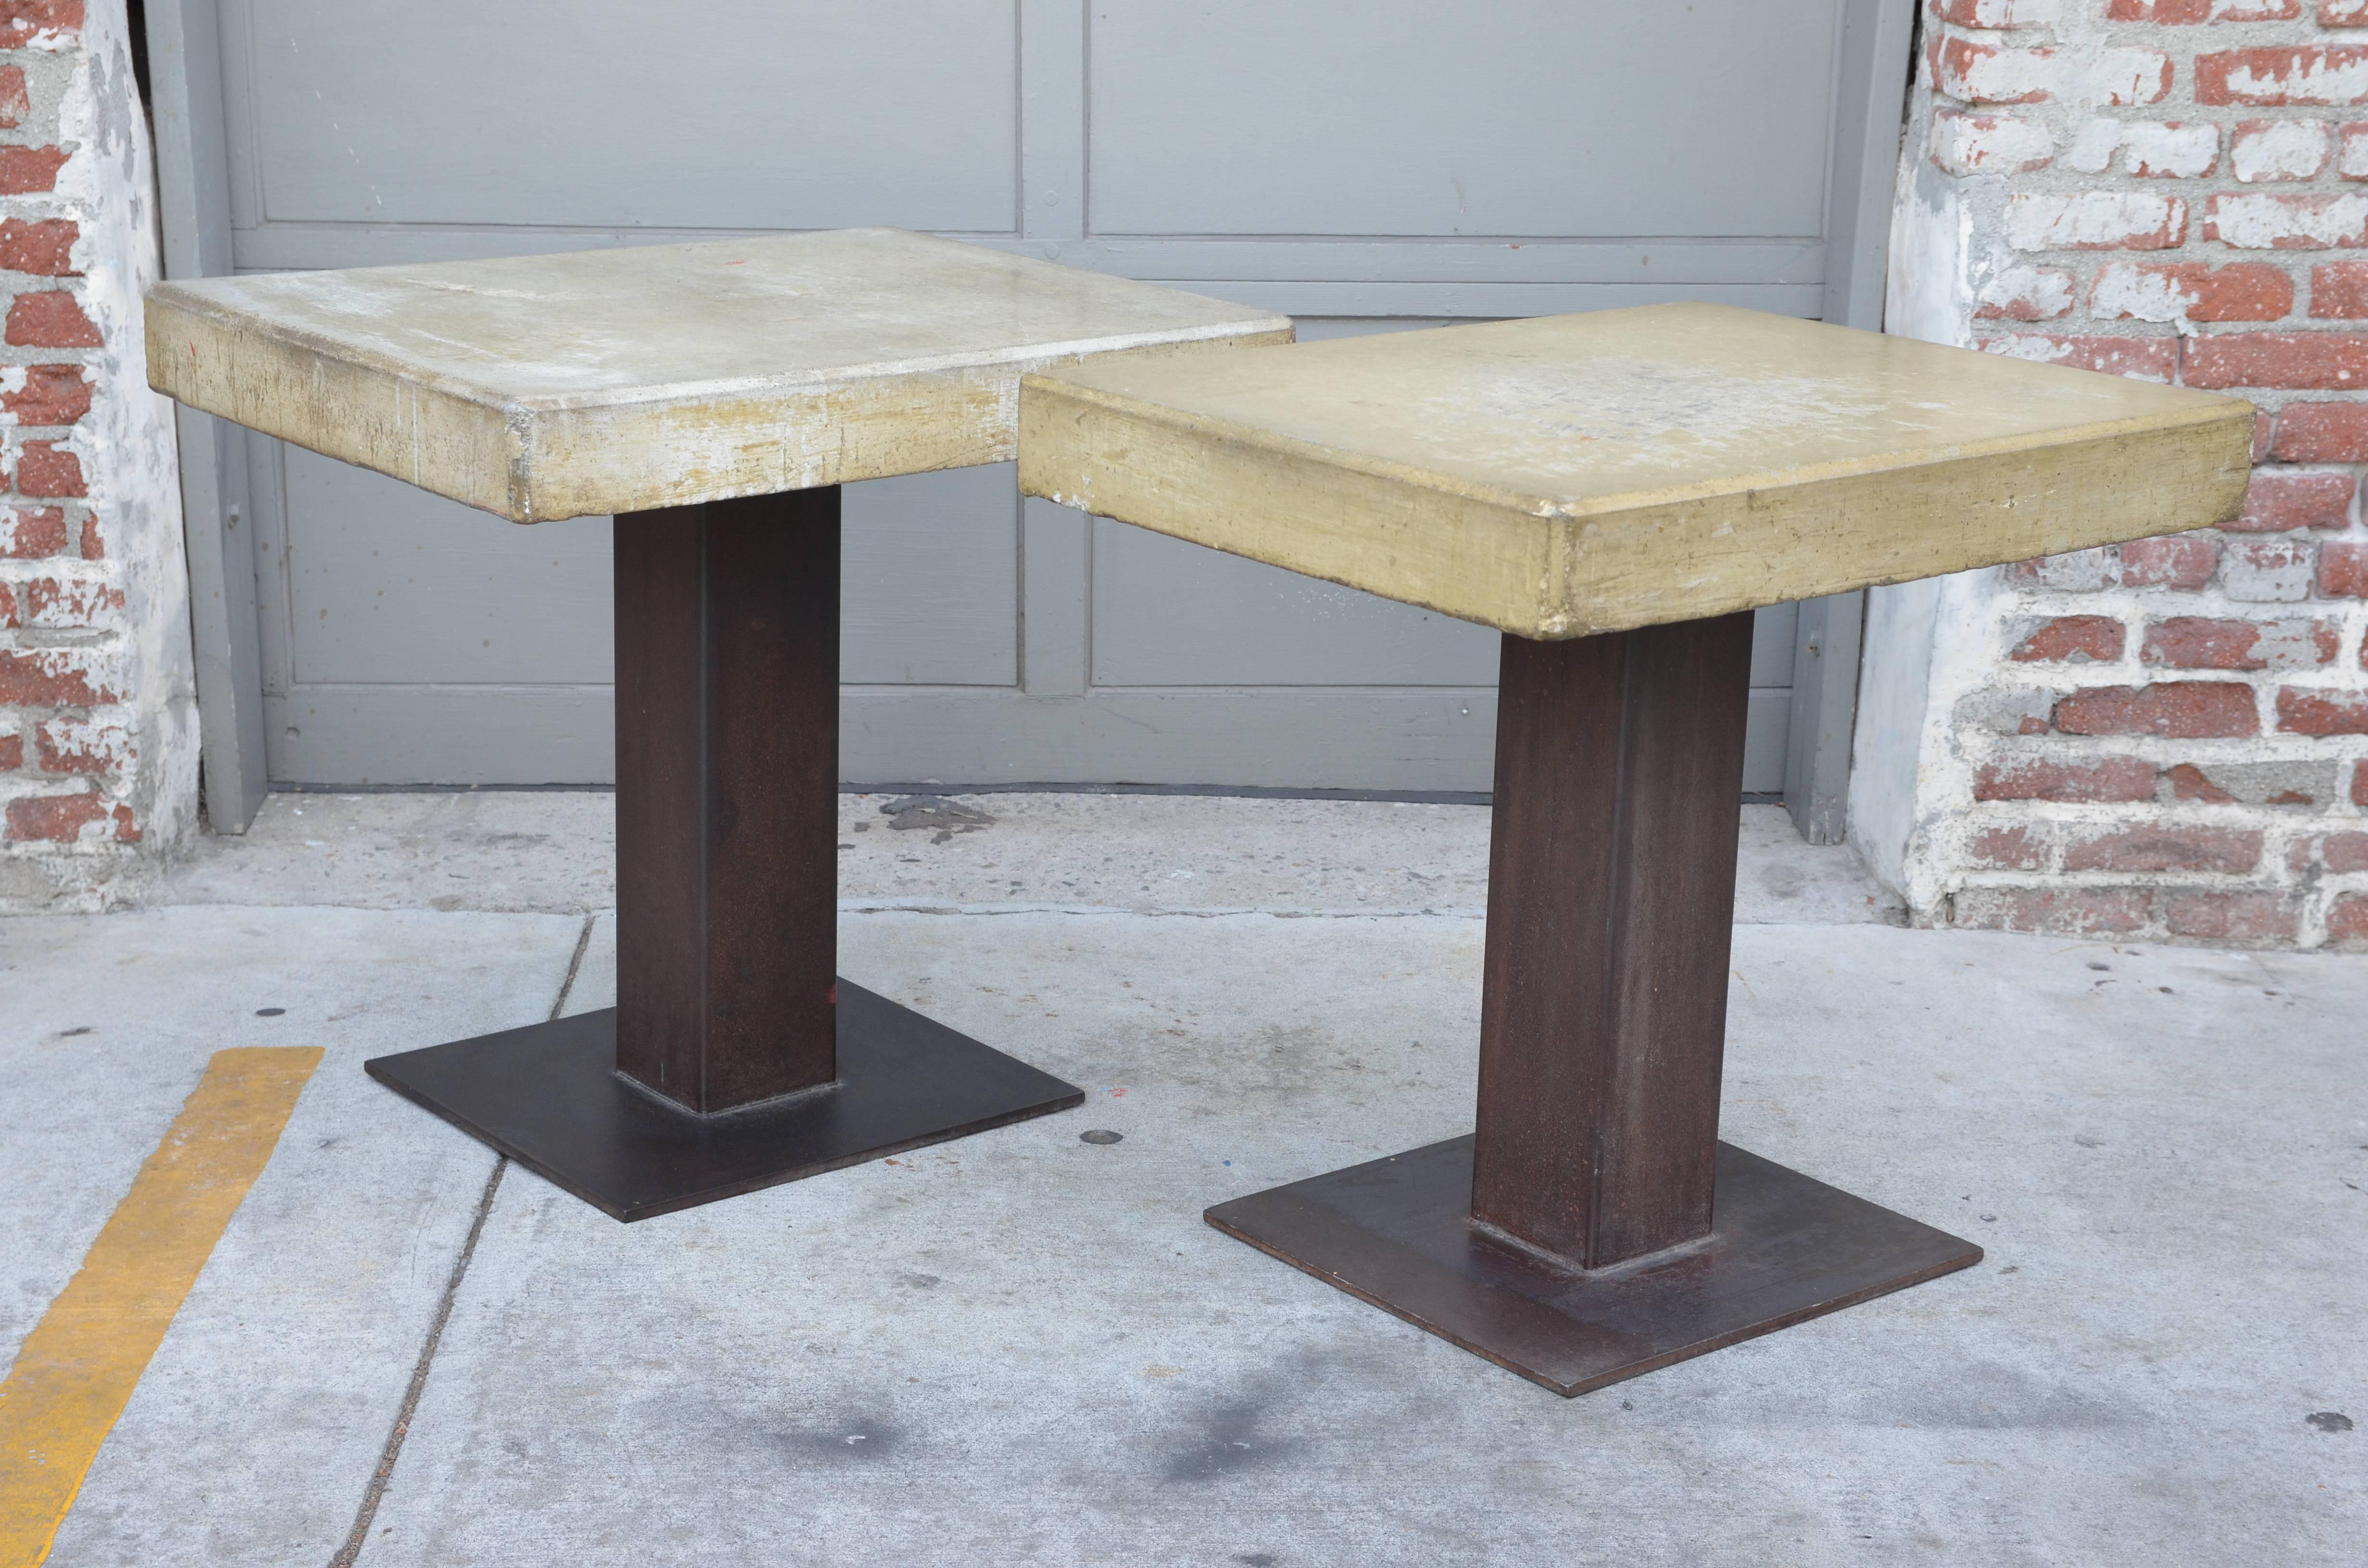 Pair of unique Brutalist concrete and steel tables. Also sold separately: See corresponding listings from the rest of our inventory.